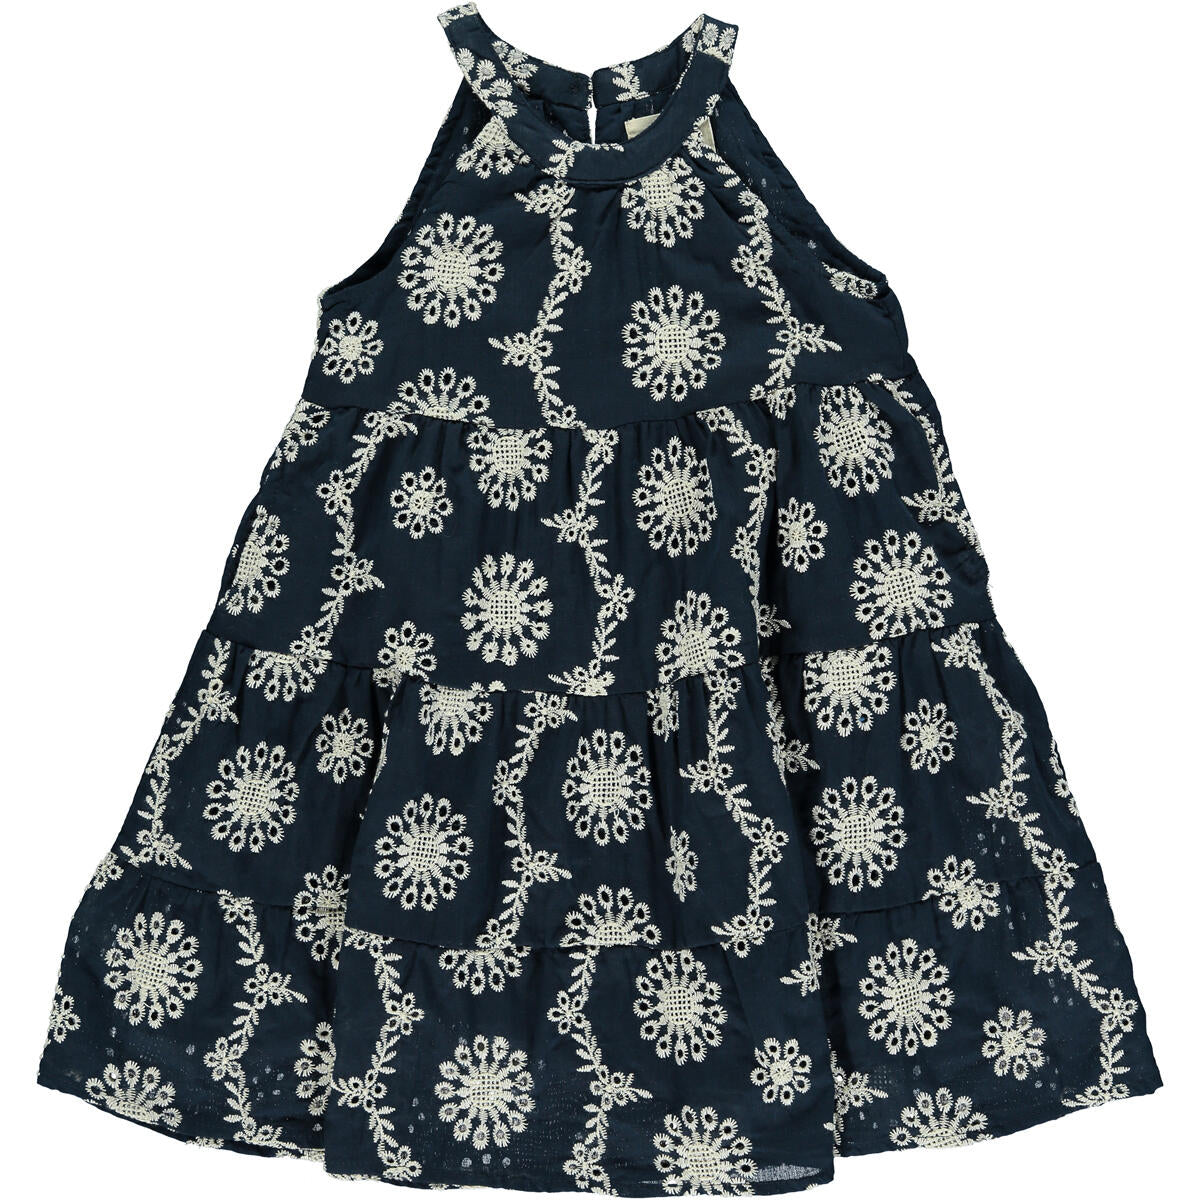 Maleia Dress in Navy/White Floral Embroidery